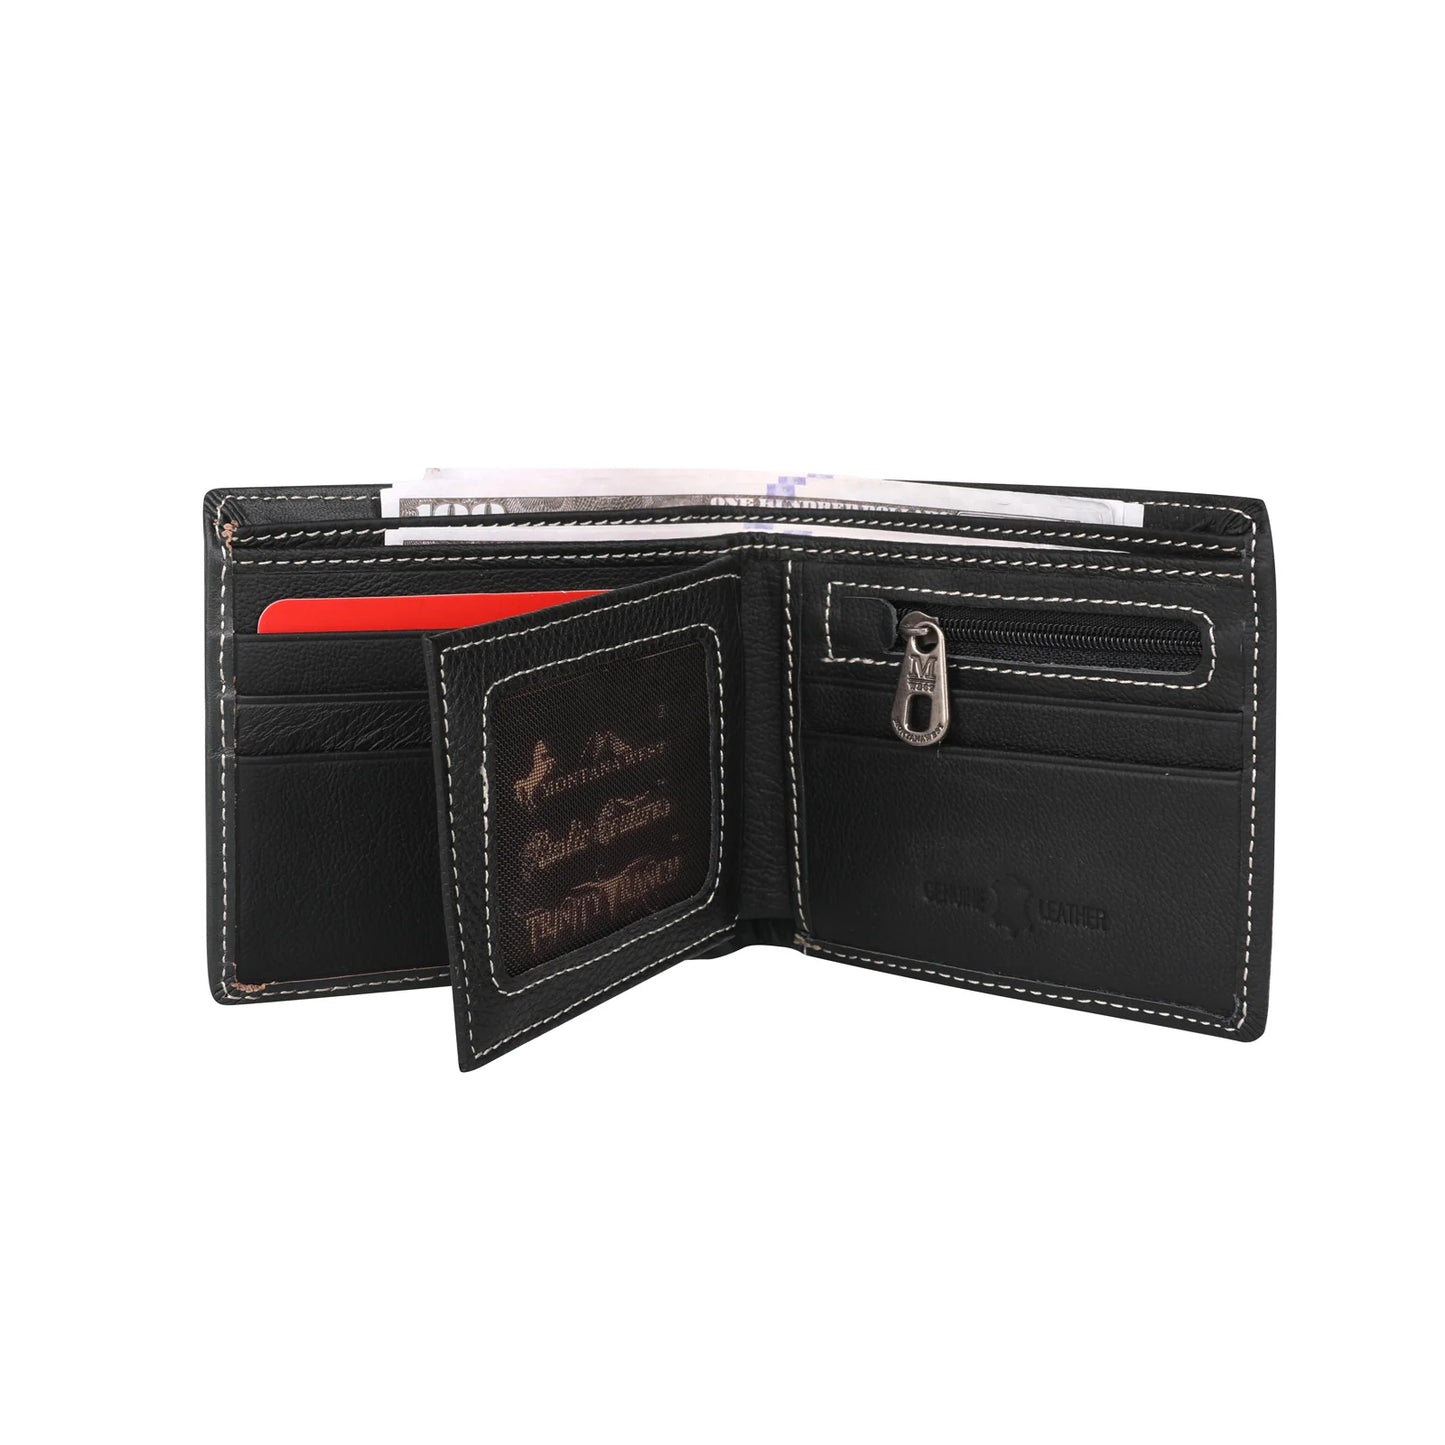 Montana West Genuine Tooled Leather Collection Mens Wallet - Black - MWSW002BK